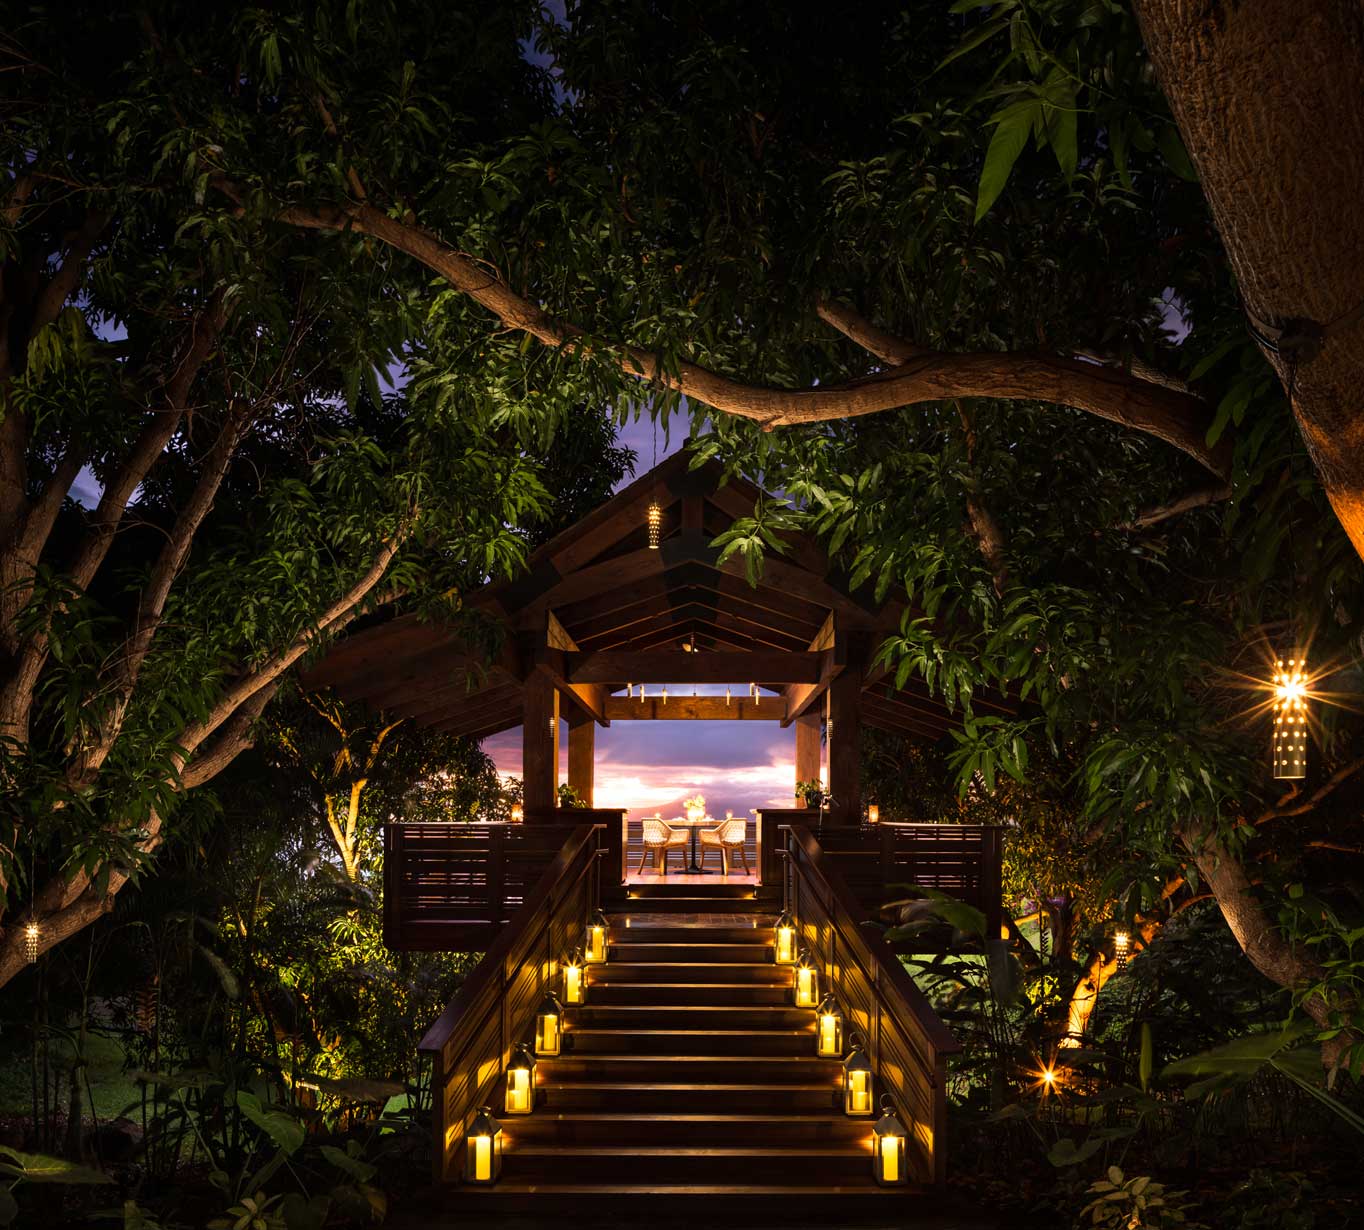 The Treehouse Maui Entrance at night lit by candles and tree lights.